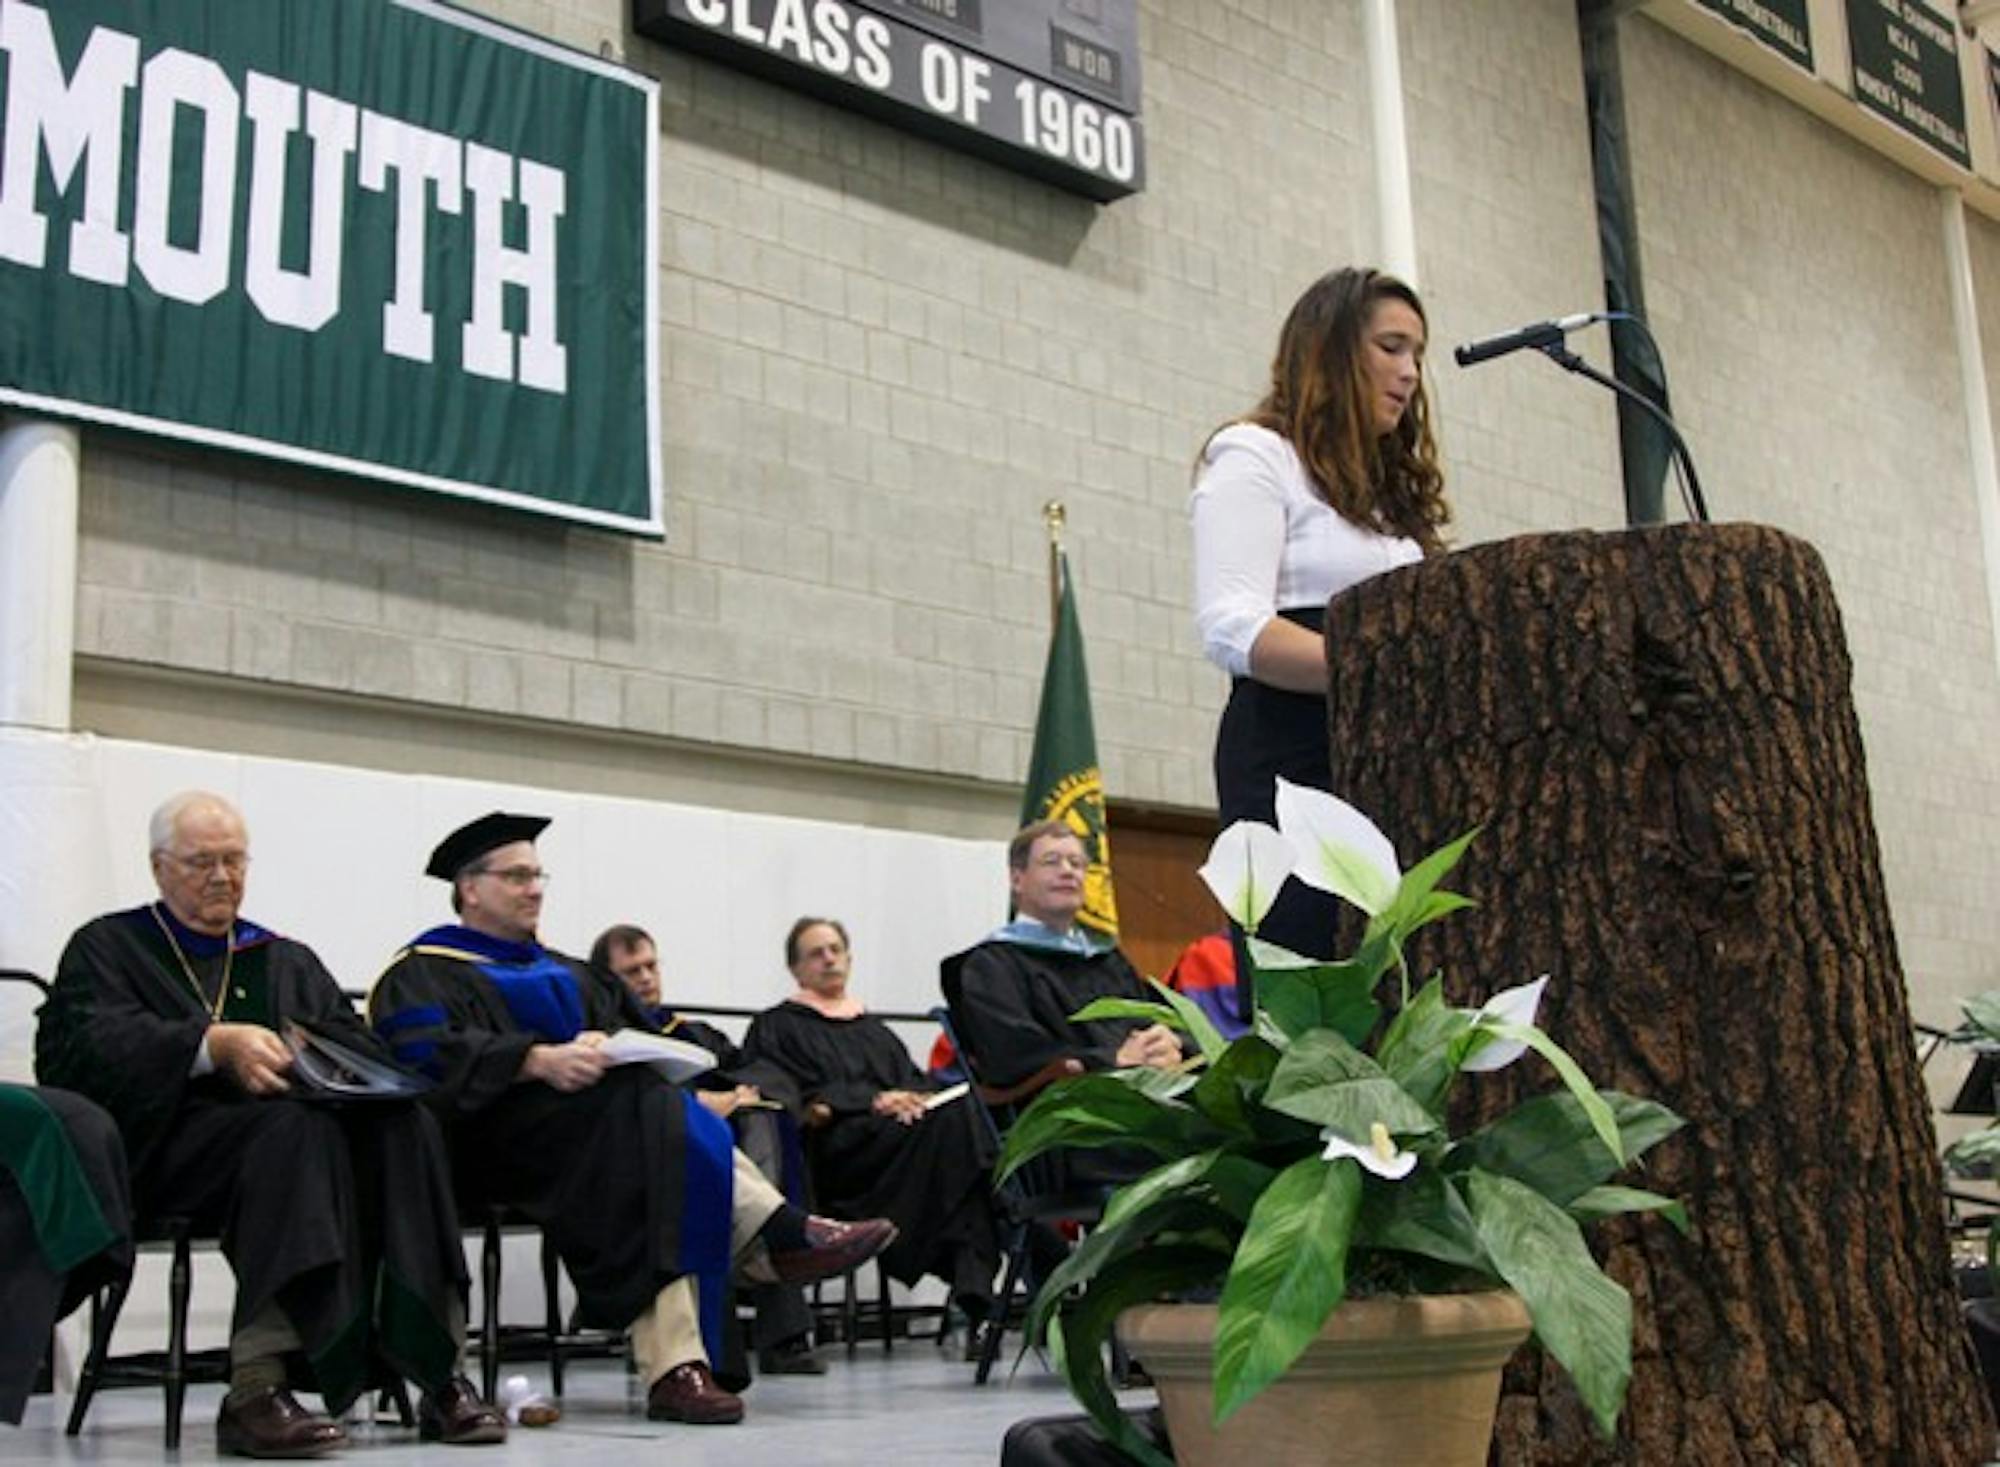 Student Body President Molly Bode '09 encourages freshman to find and pursue their passions over the next four years at Dartmouth.